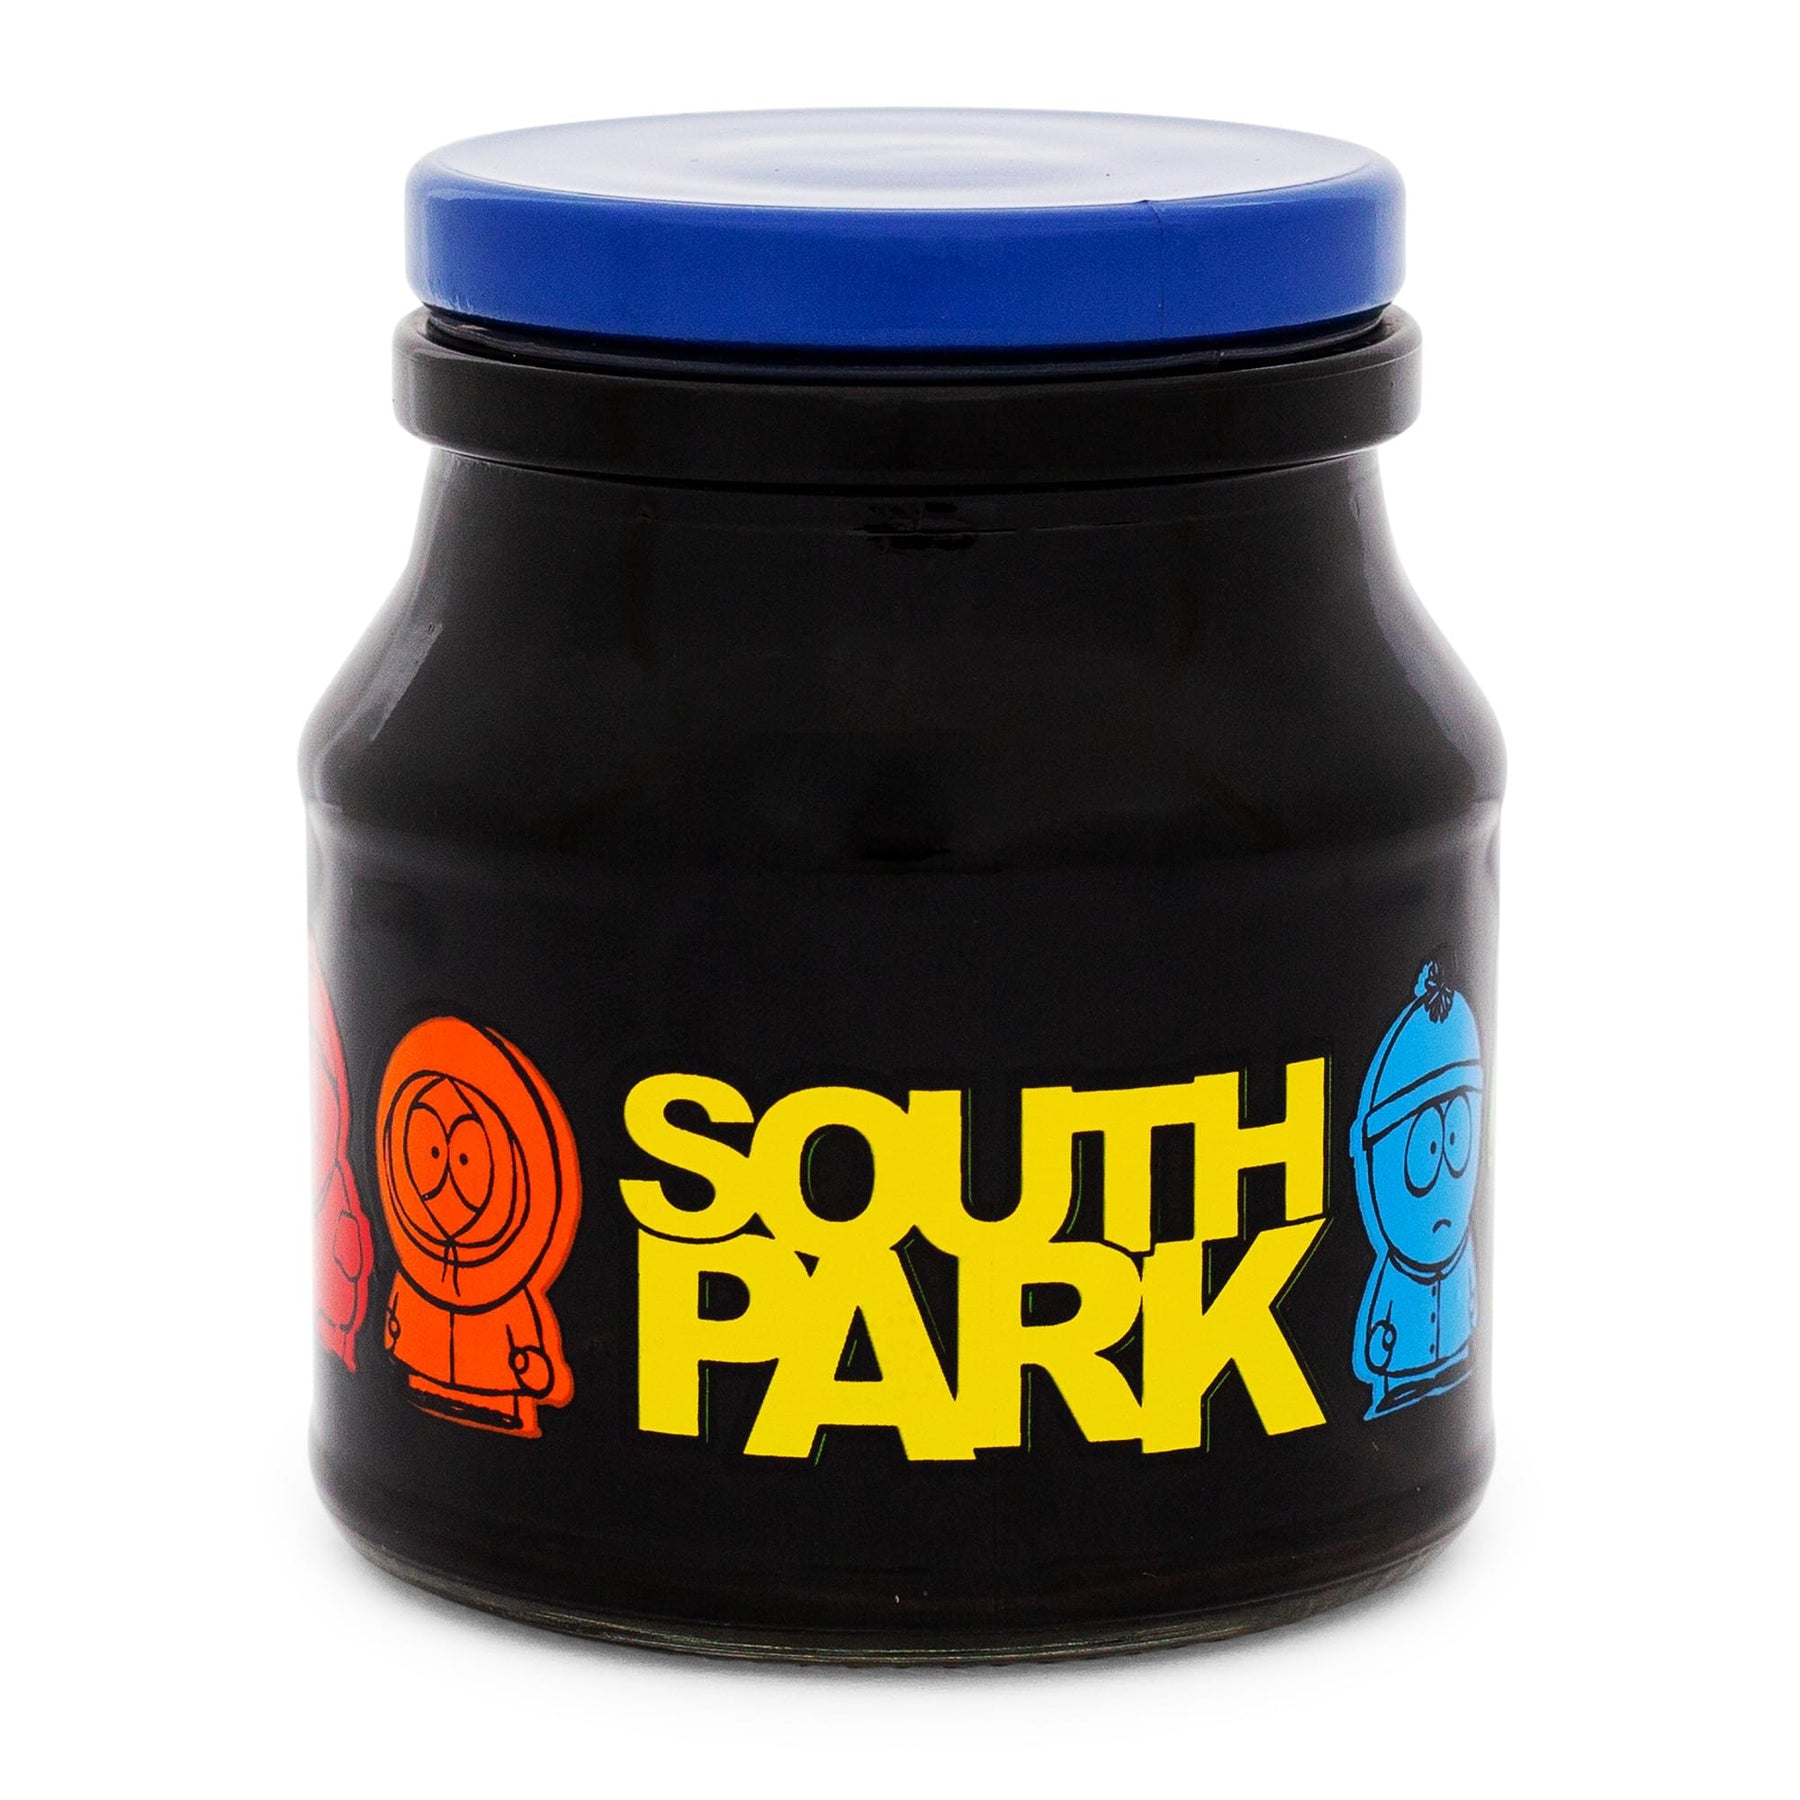 South Park Characters Glass Storage Jar With Lid | Holds 5 Ounces